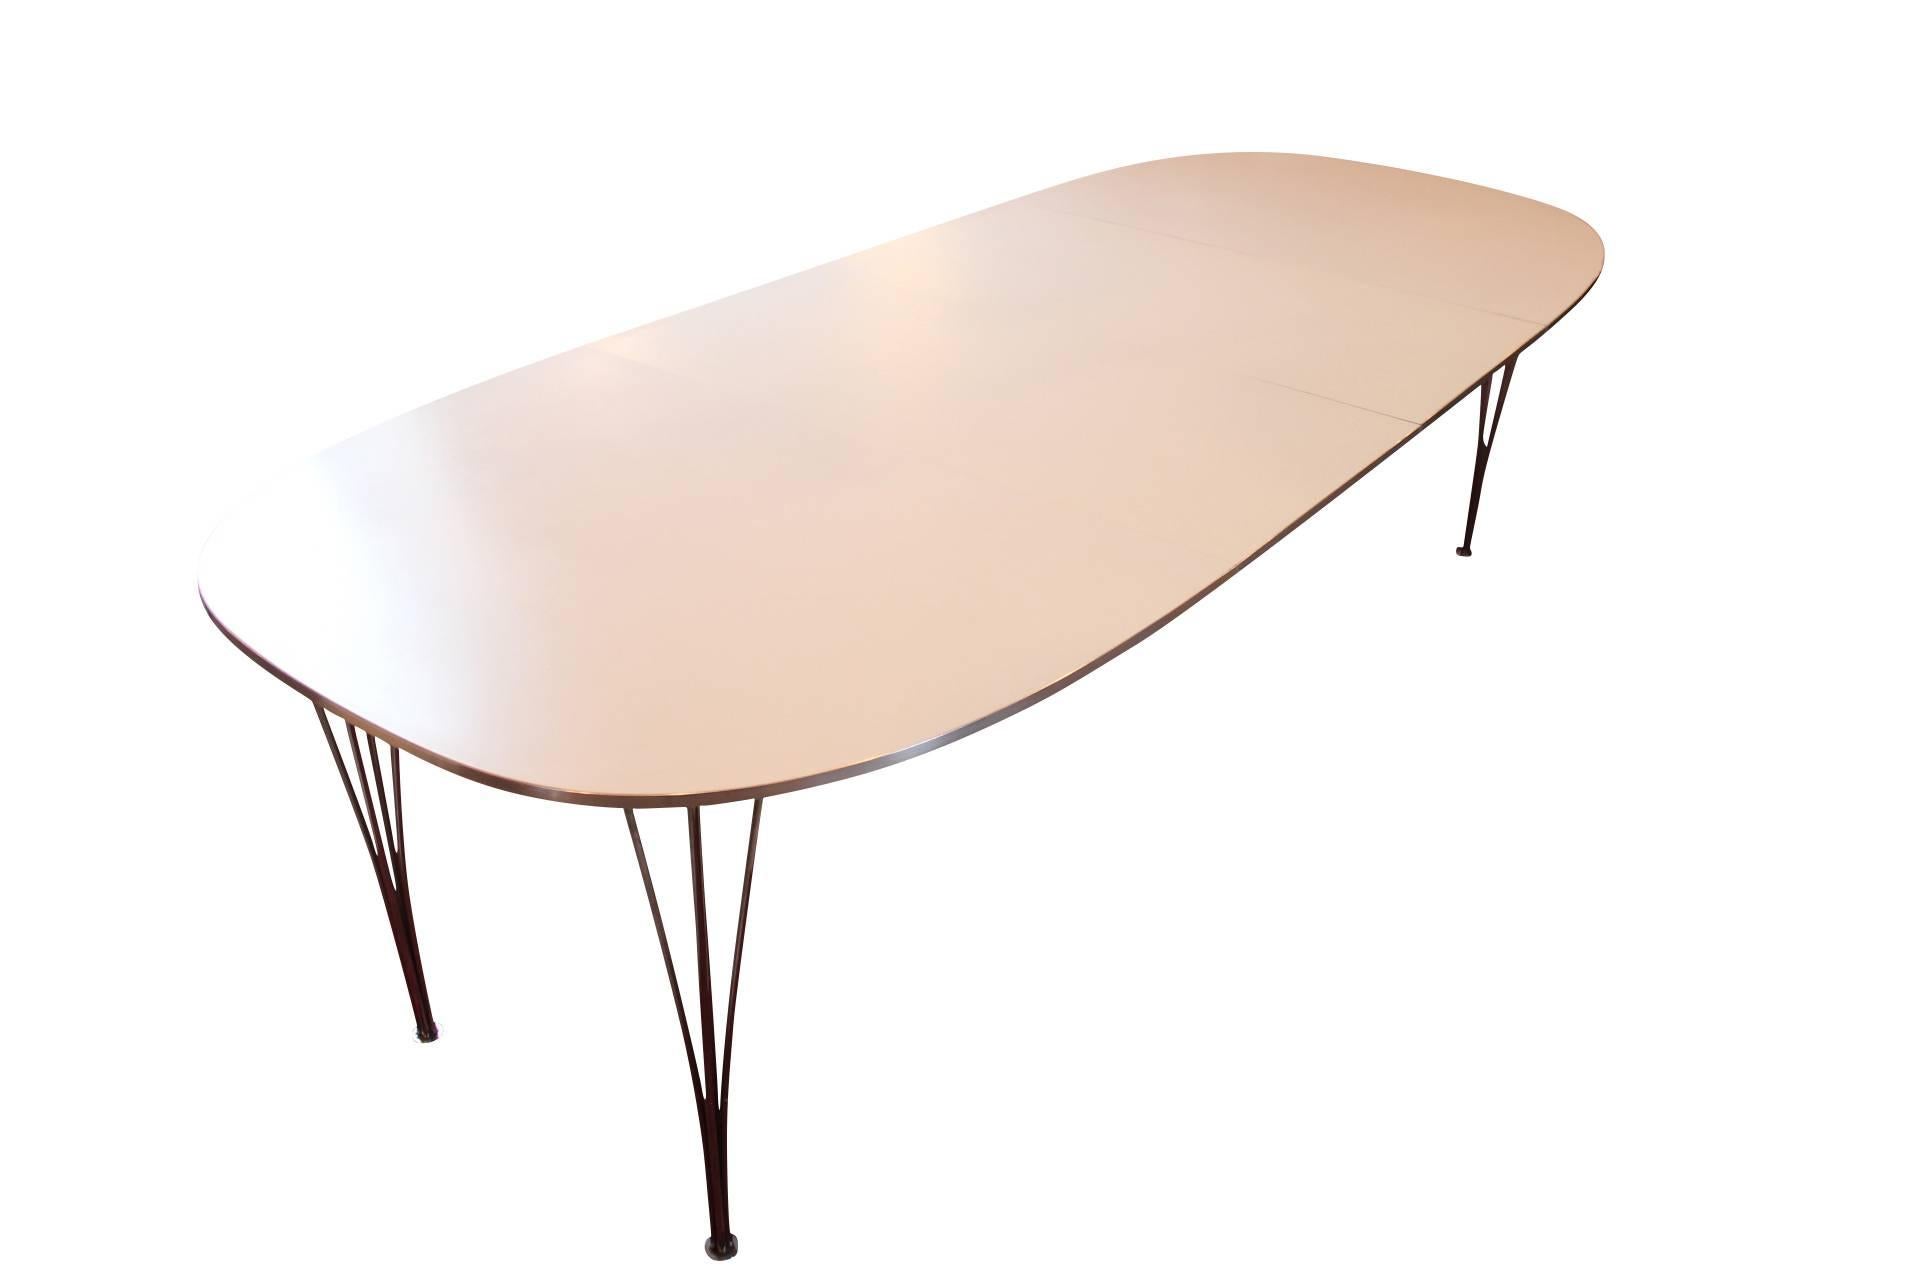 Scandinavian Modern Extension Table, B618, by Piet Hein and Manufactured by Fritz Hansen from 2004 For Sale